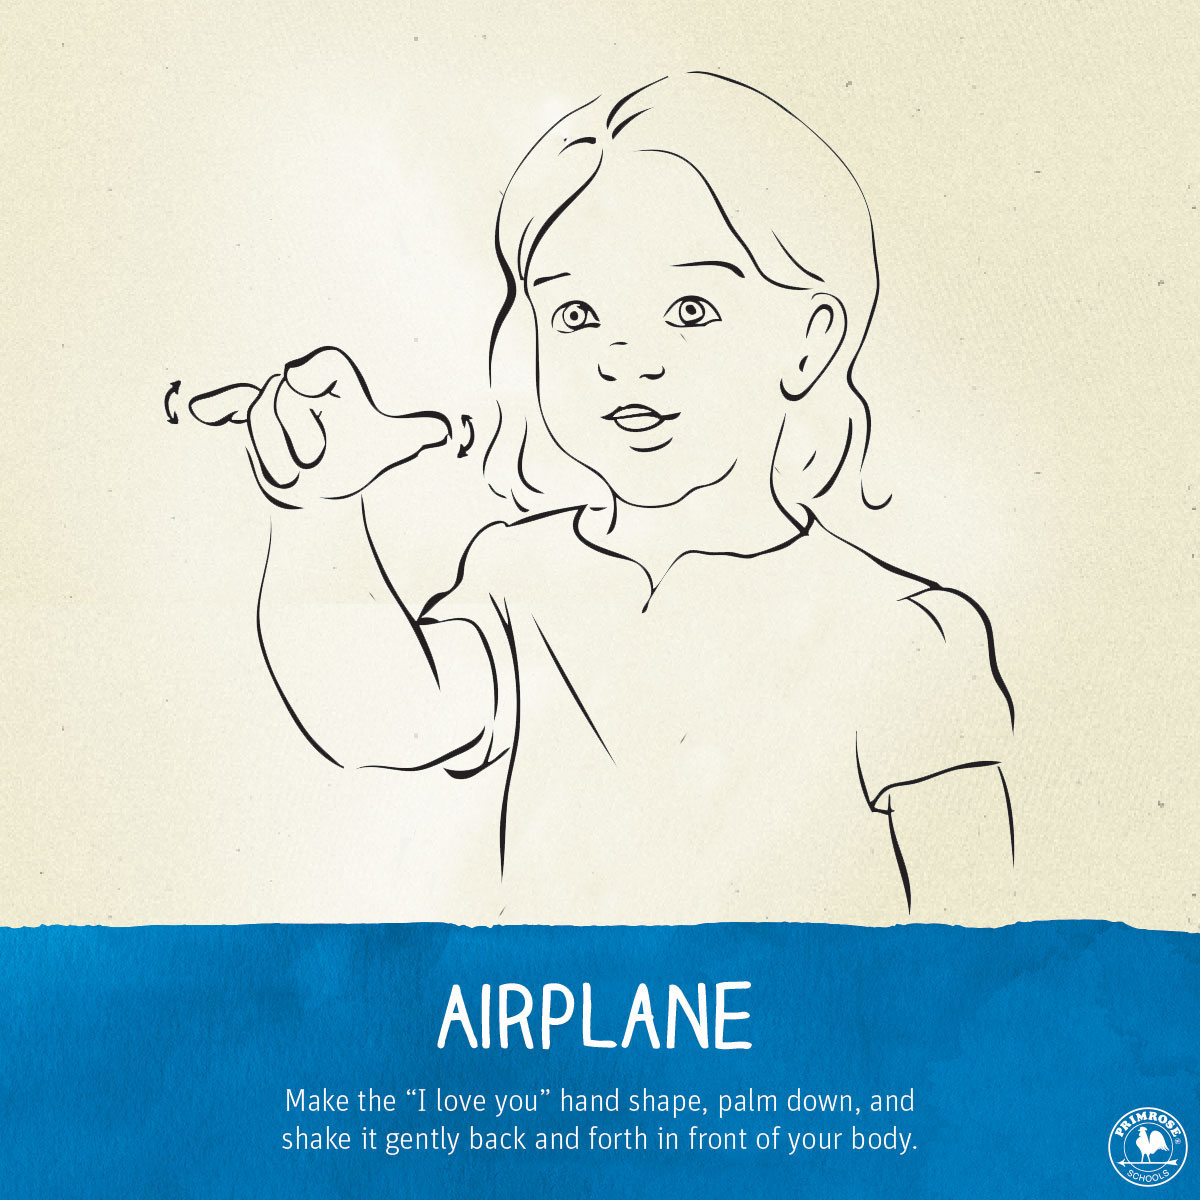 Illustration describing how to sign the word "Airplane"